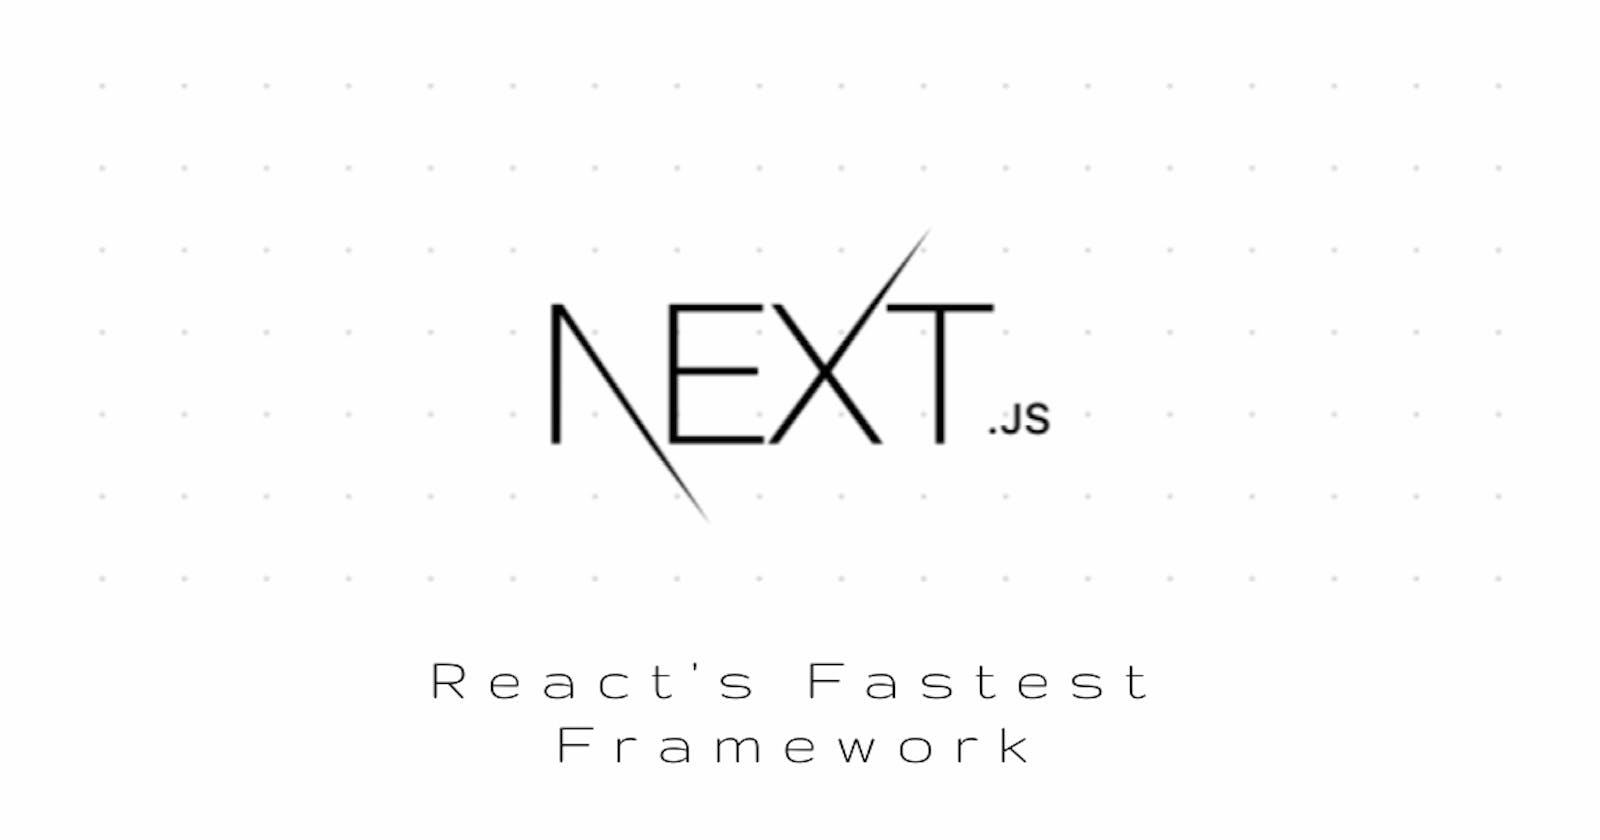 "Get Started Quickly With Next.js: React's Fastest Framework"